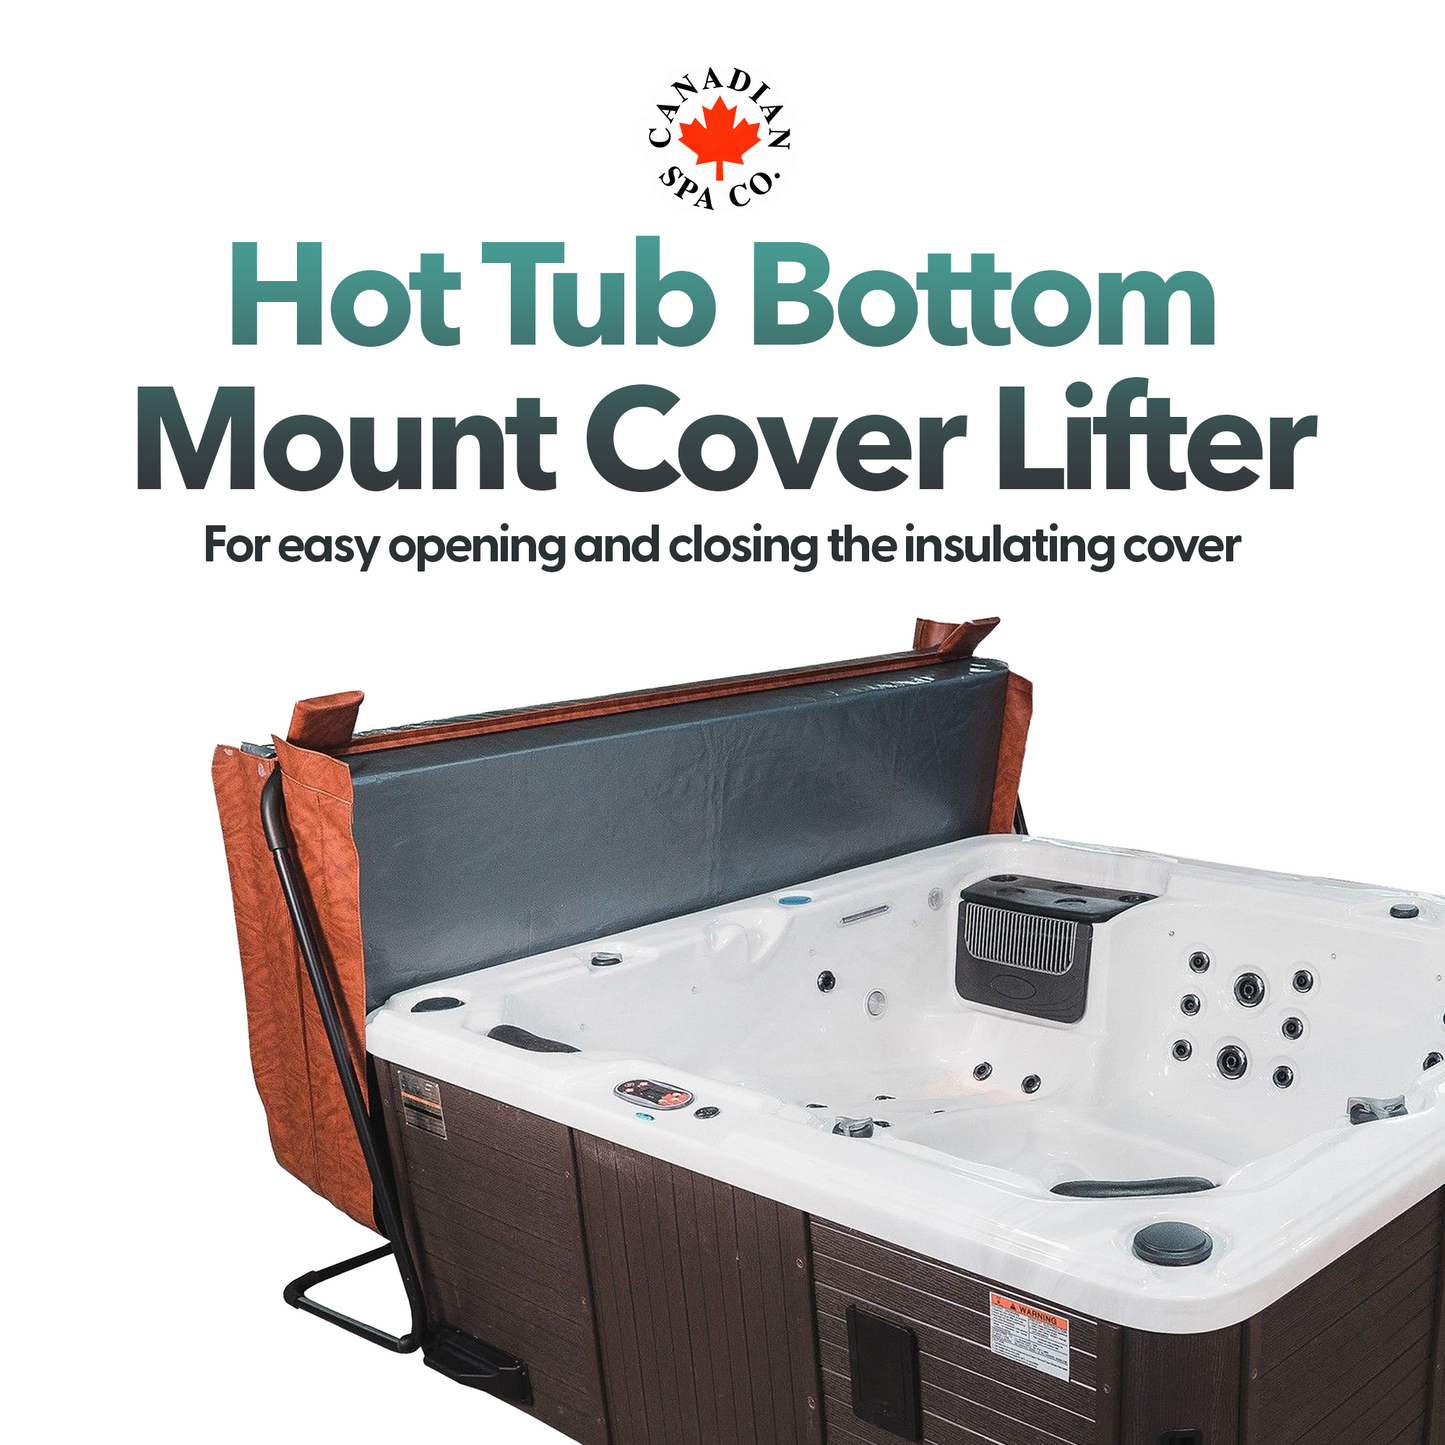 Bottom Mount Cover Lifter